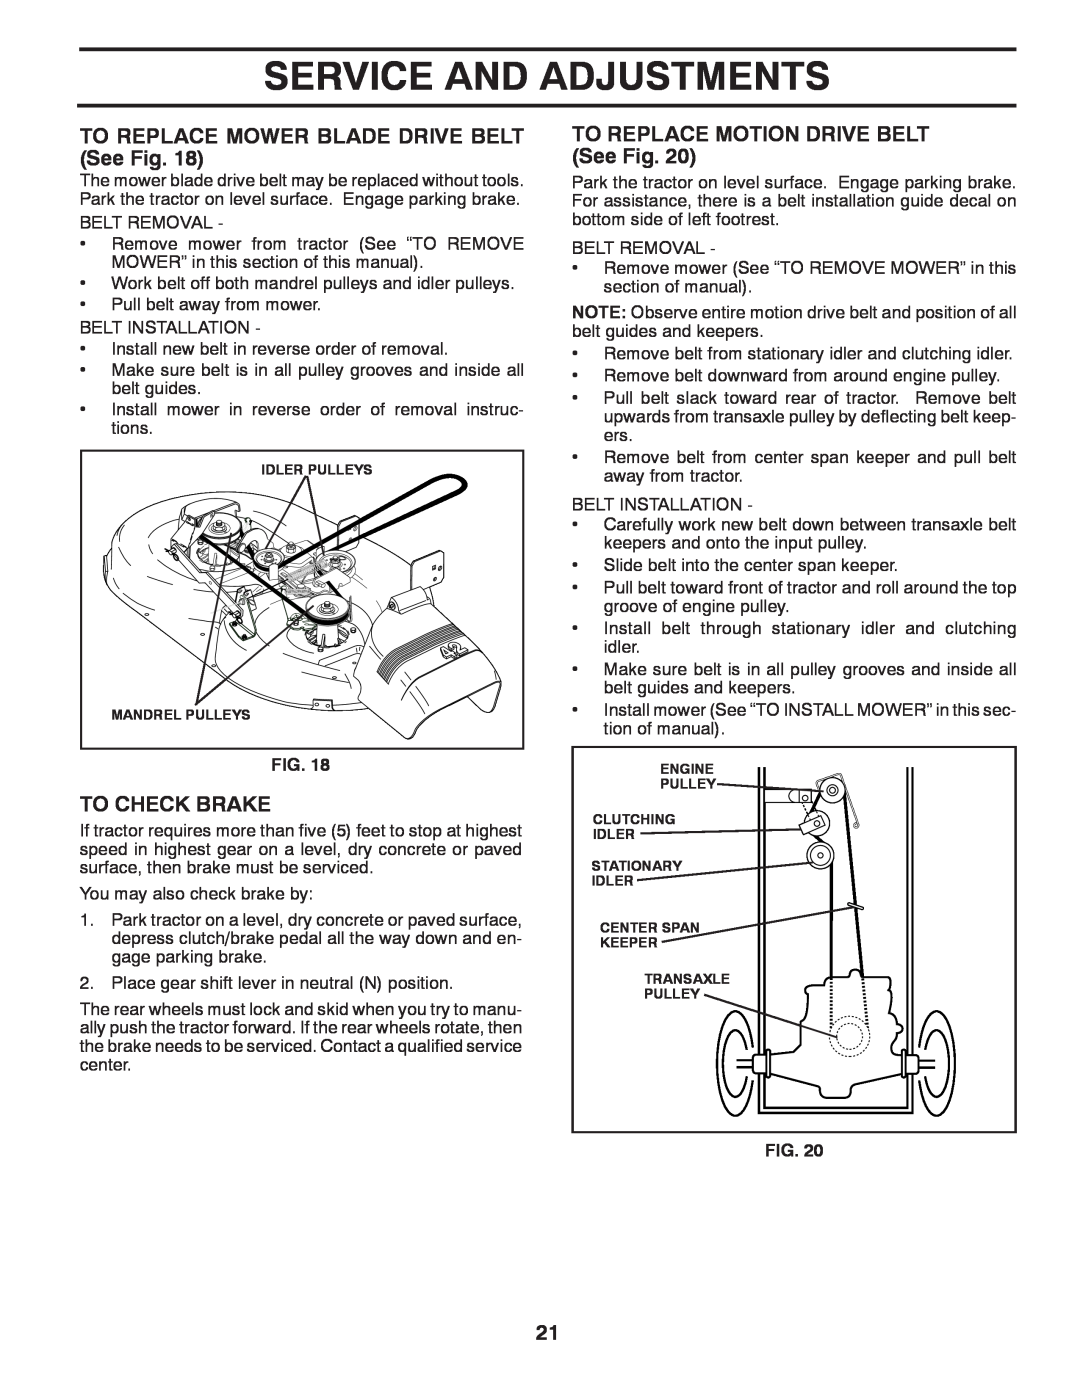 Poulan 425179 manual TO REPLACE MOWER BLADE DRIVE BELT See Fig, To Check Brake, TO REPLACE MOTION DRIVE BELT See Fig 